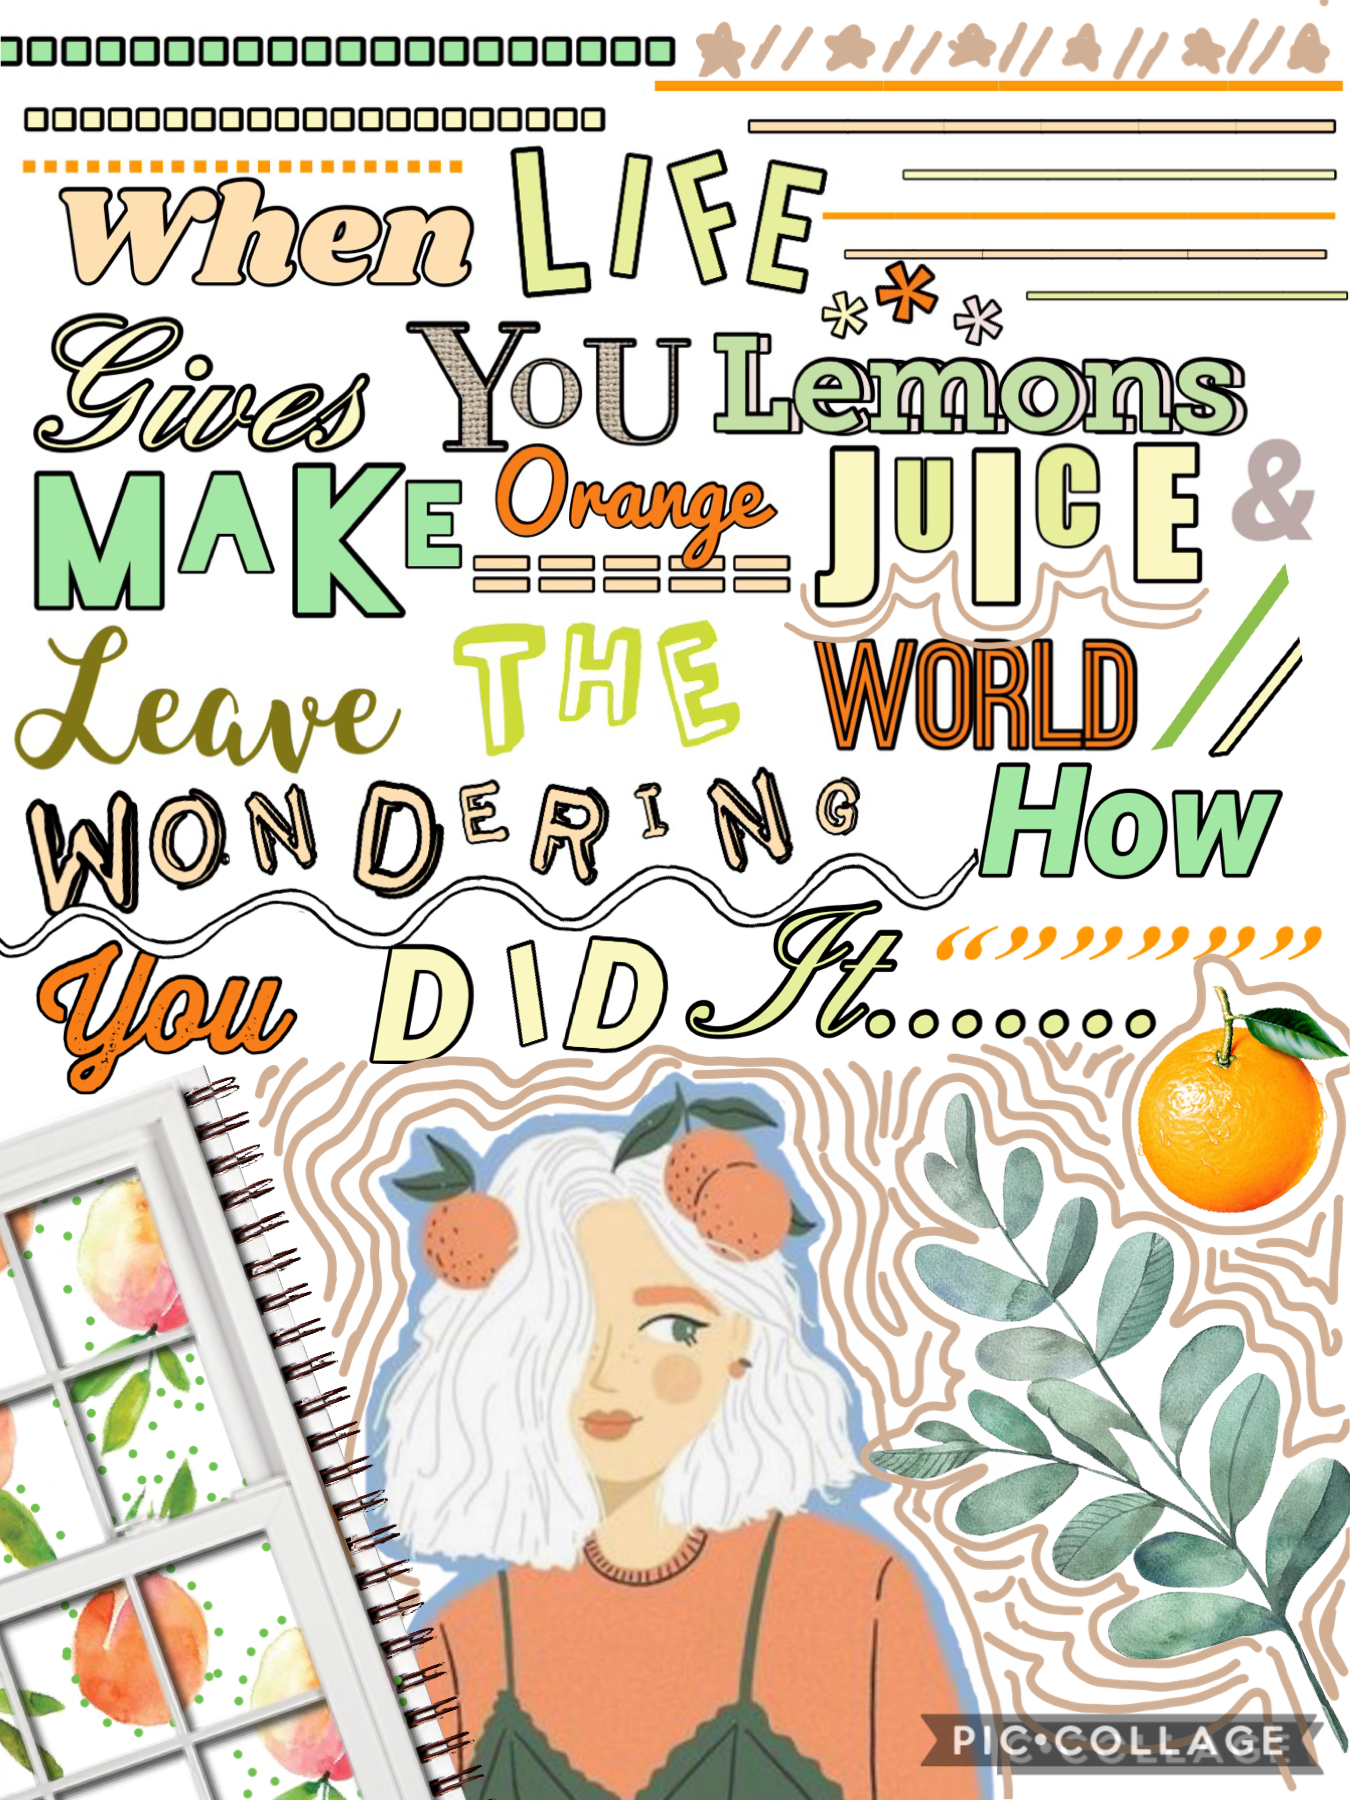 🍊tap this orange!🍊
I don’t like how this turned out and I really don’t no why I am posting it! I honestly feel like somethings missing to it. But oh well at least I tired something out of my comfort zone! I usually don’t work with bright/neon out there co